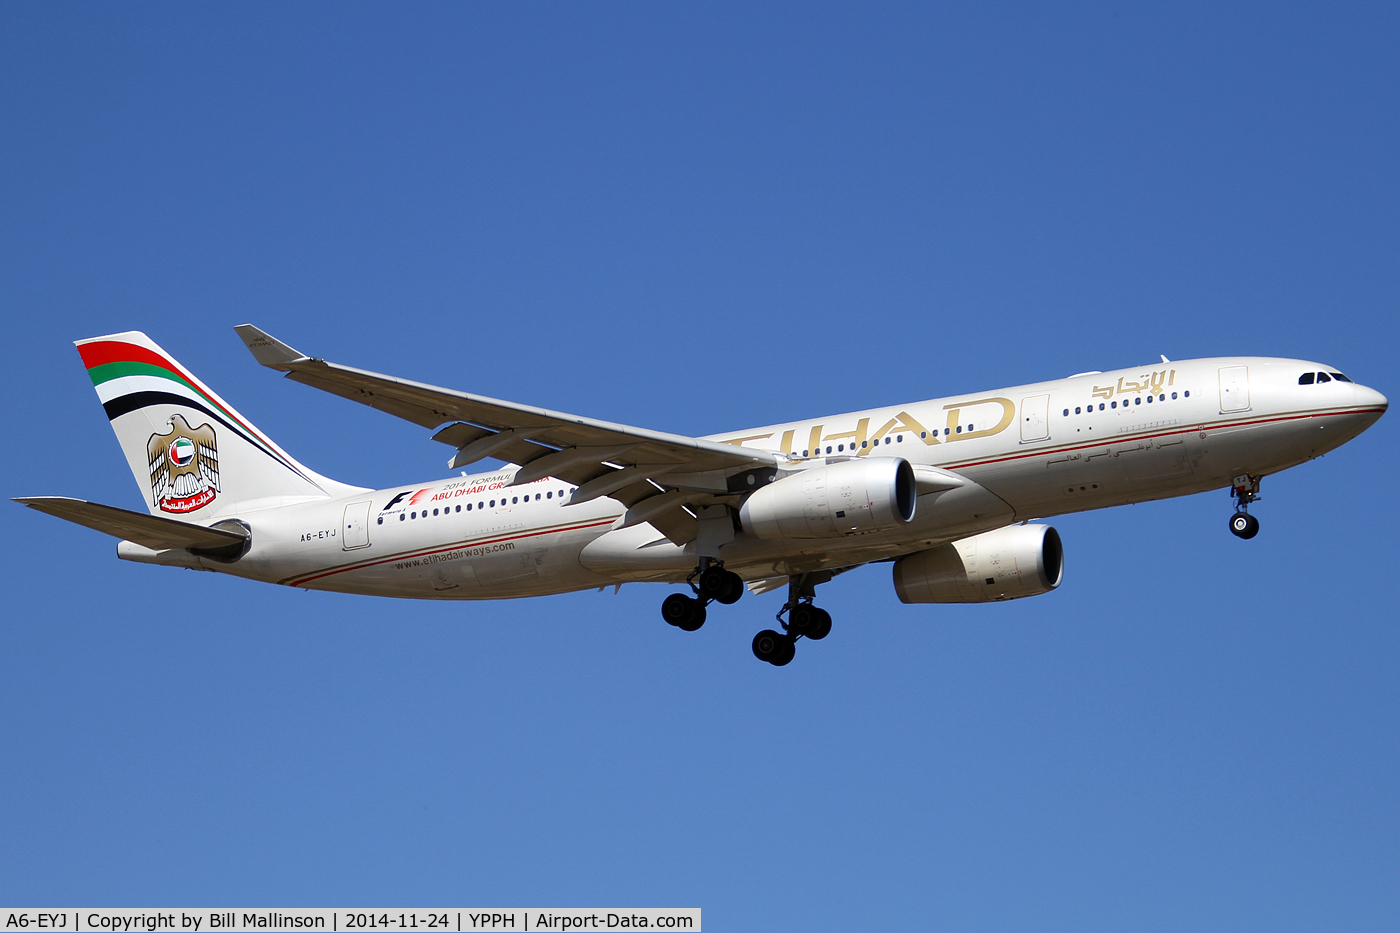 A6-EYJ, 2006 Airbus A330-243 C/N 737, finals to 21